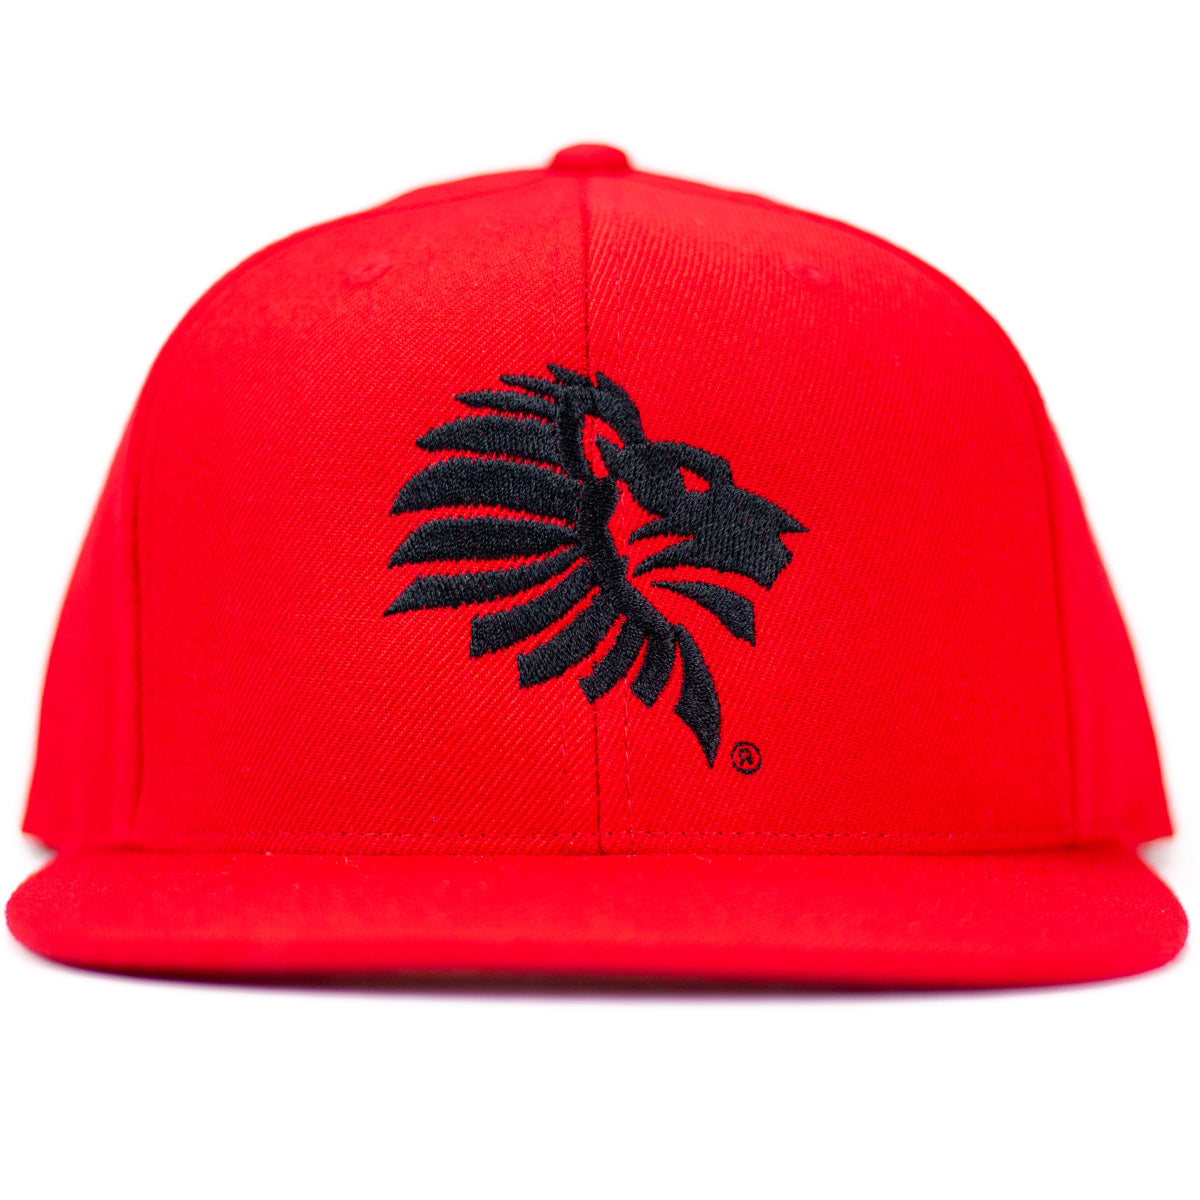 Front View - LHU Heritage Logo Red Snapback